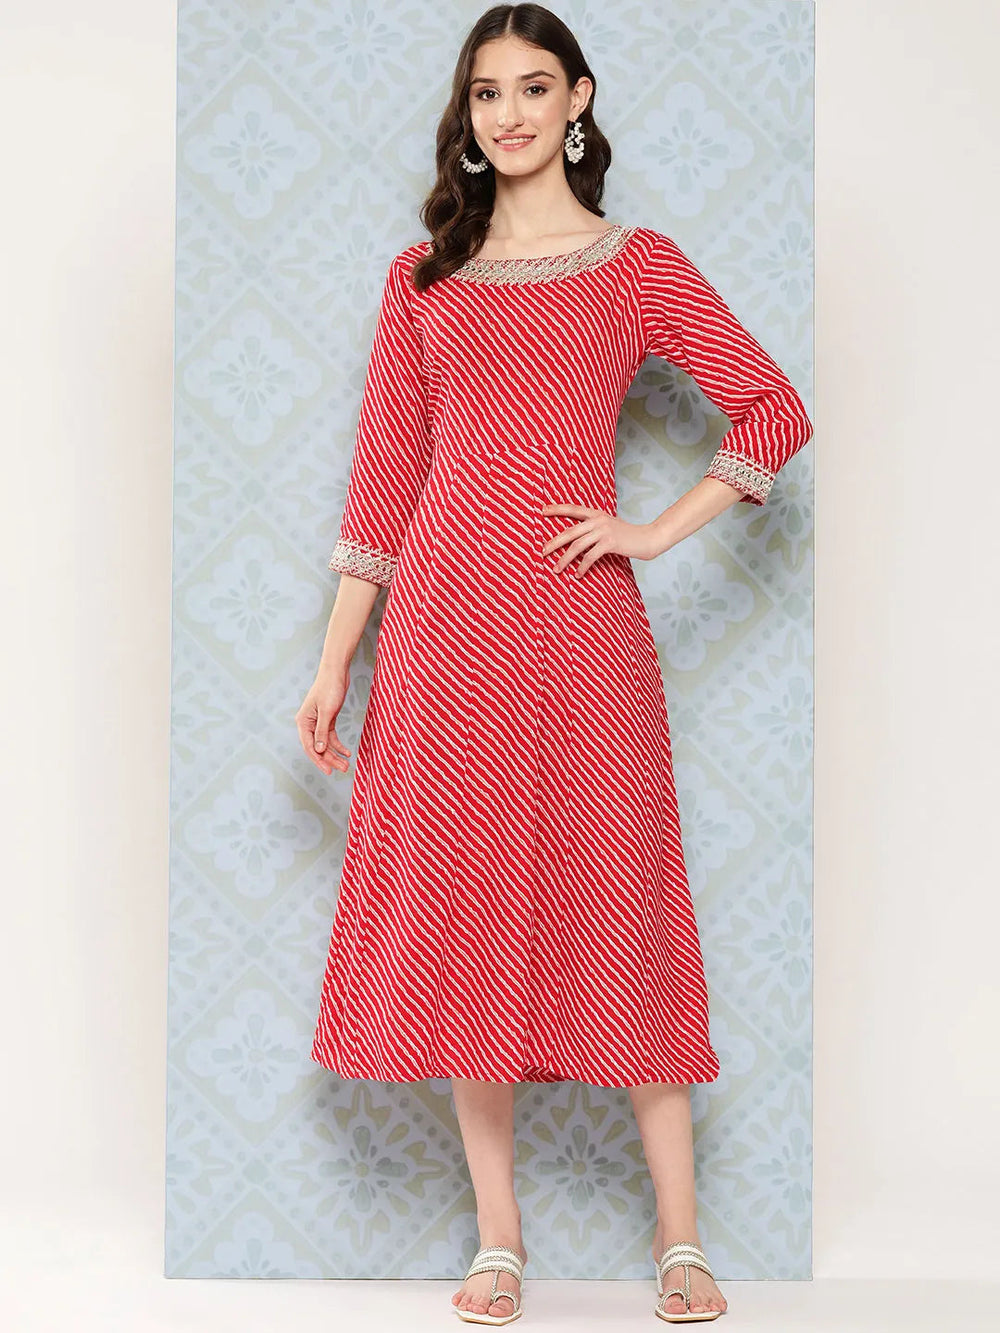 Red Ethnic A-Line Maxi Dress-Yufta Store-9769DRSRDS